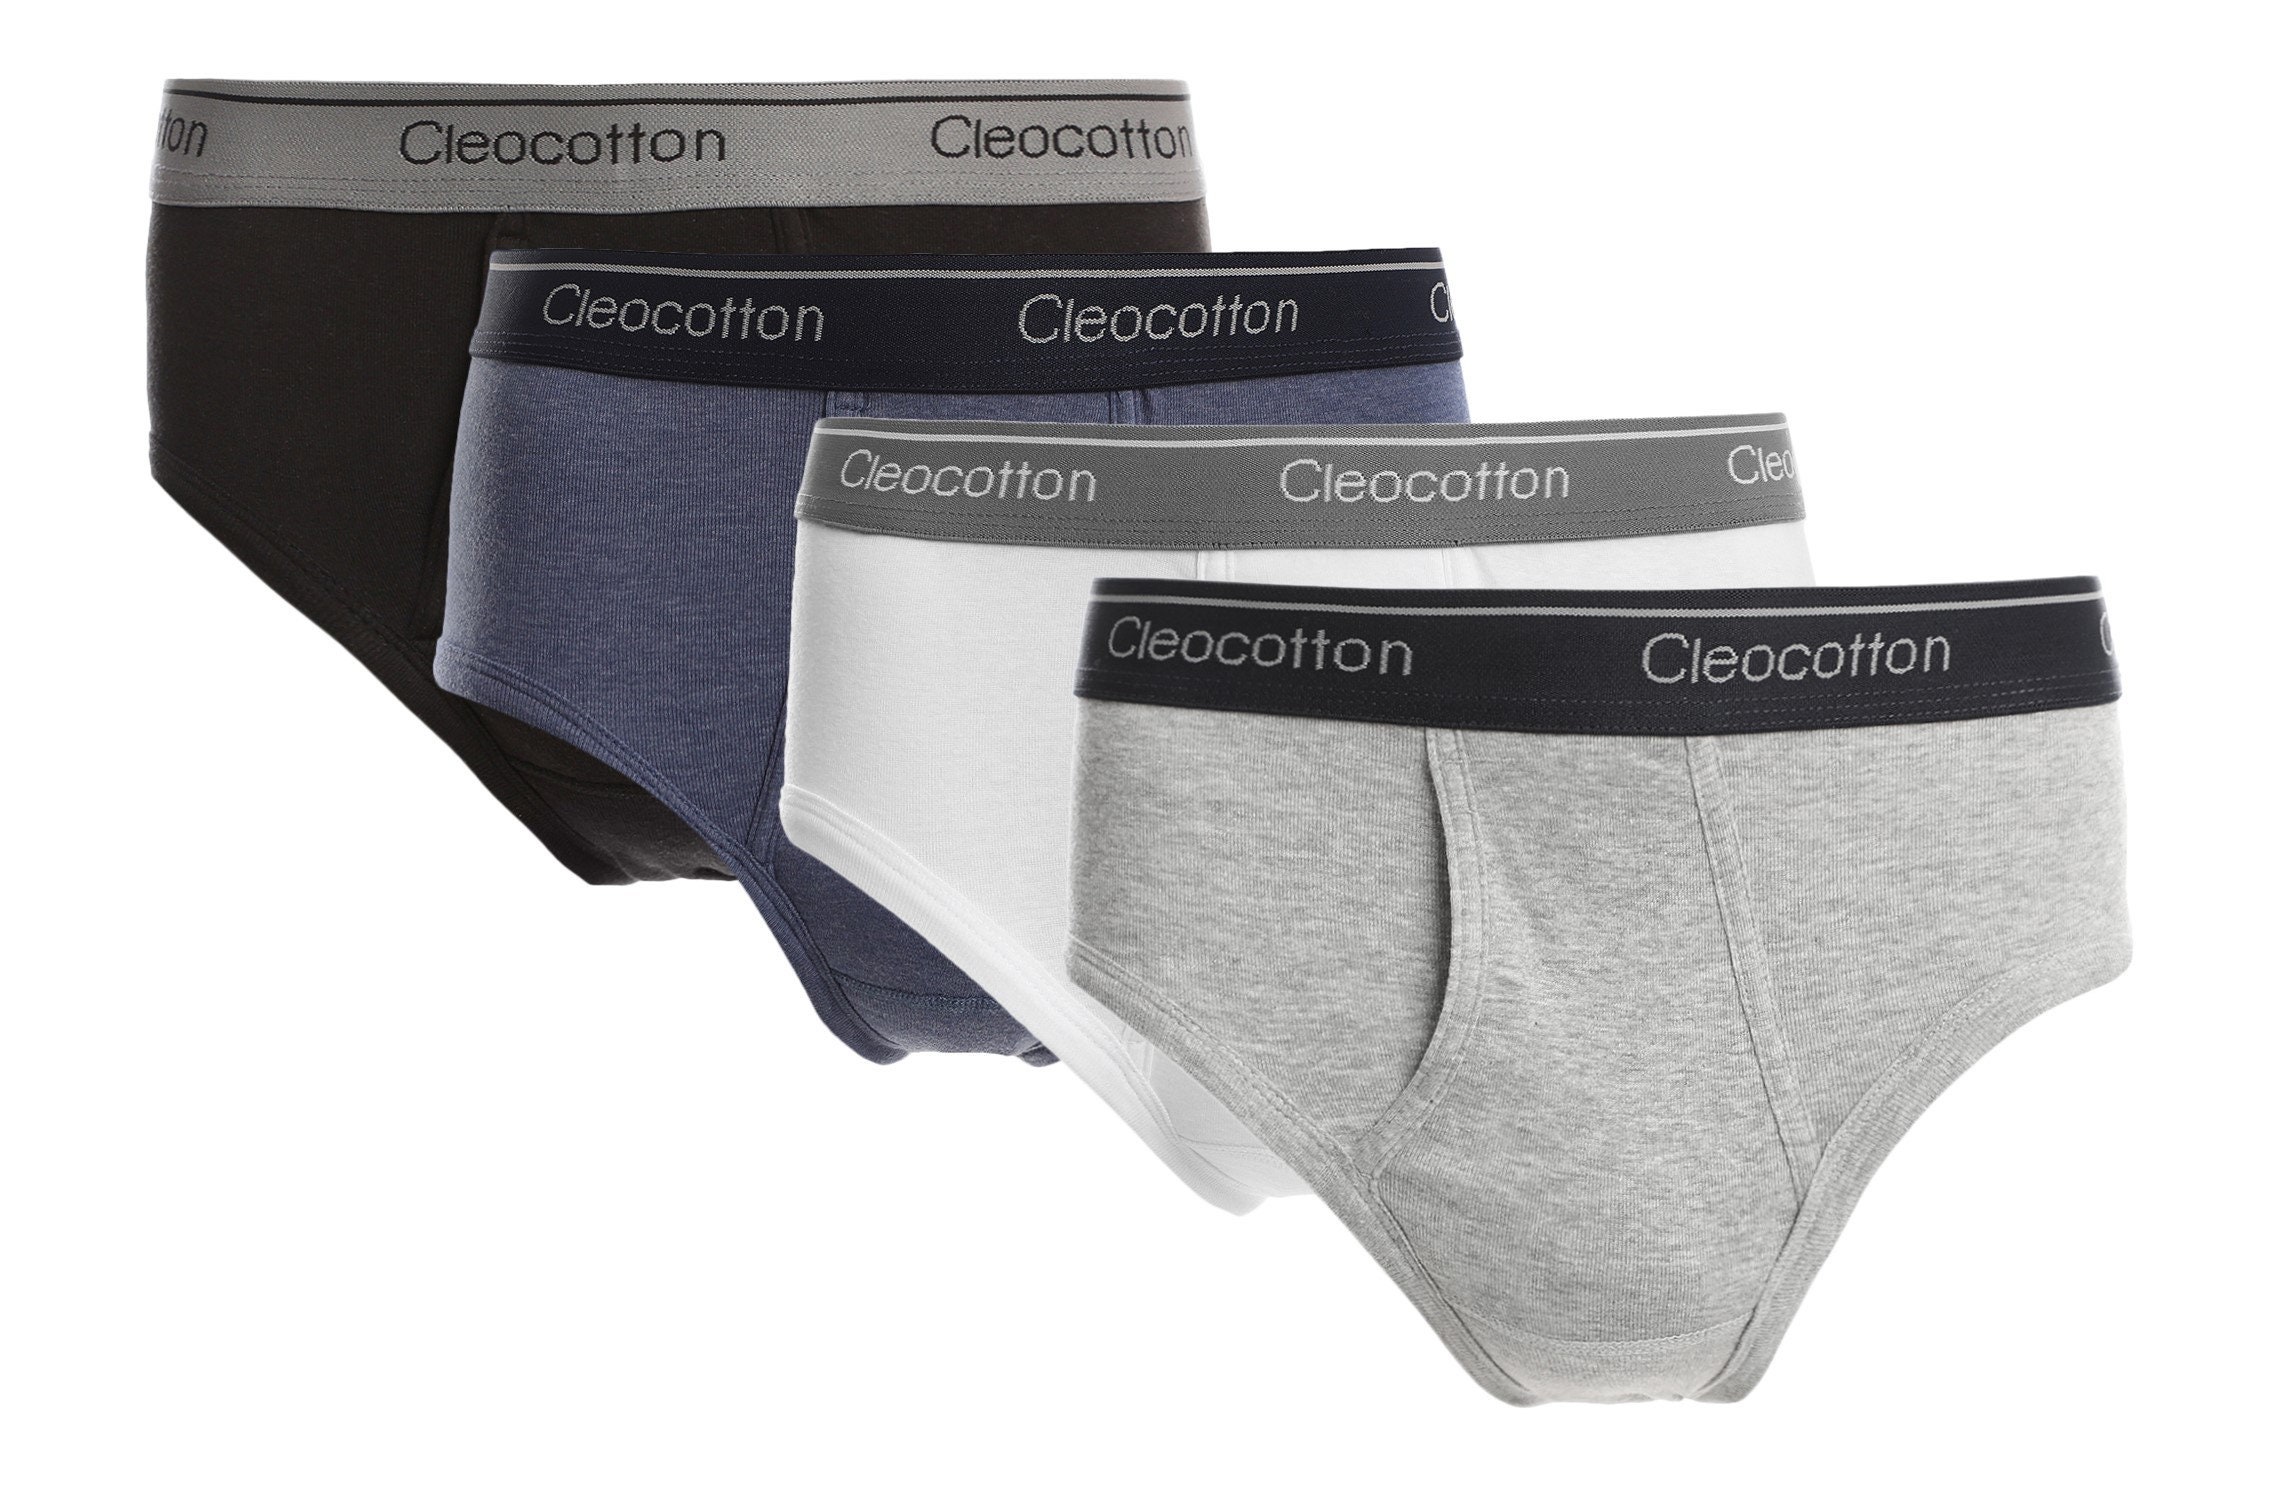 Cleocotton 4 Pack Mens Underwear slim Fit Mens Brief, Multicolor Packs  Cotton Rich, Breathable, Ultra Soft made in Egypt 